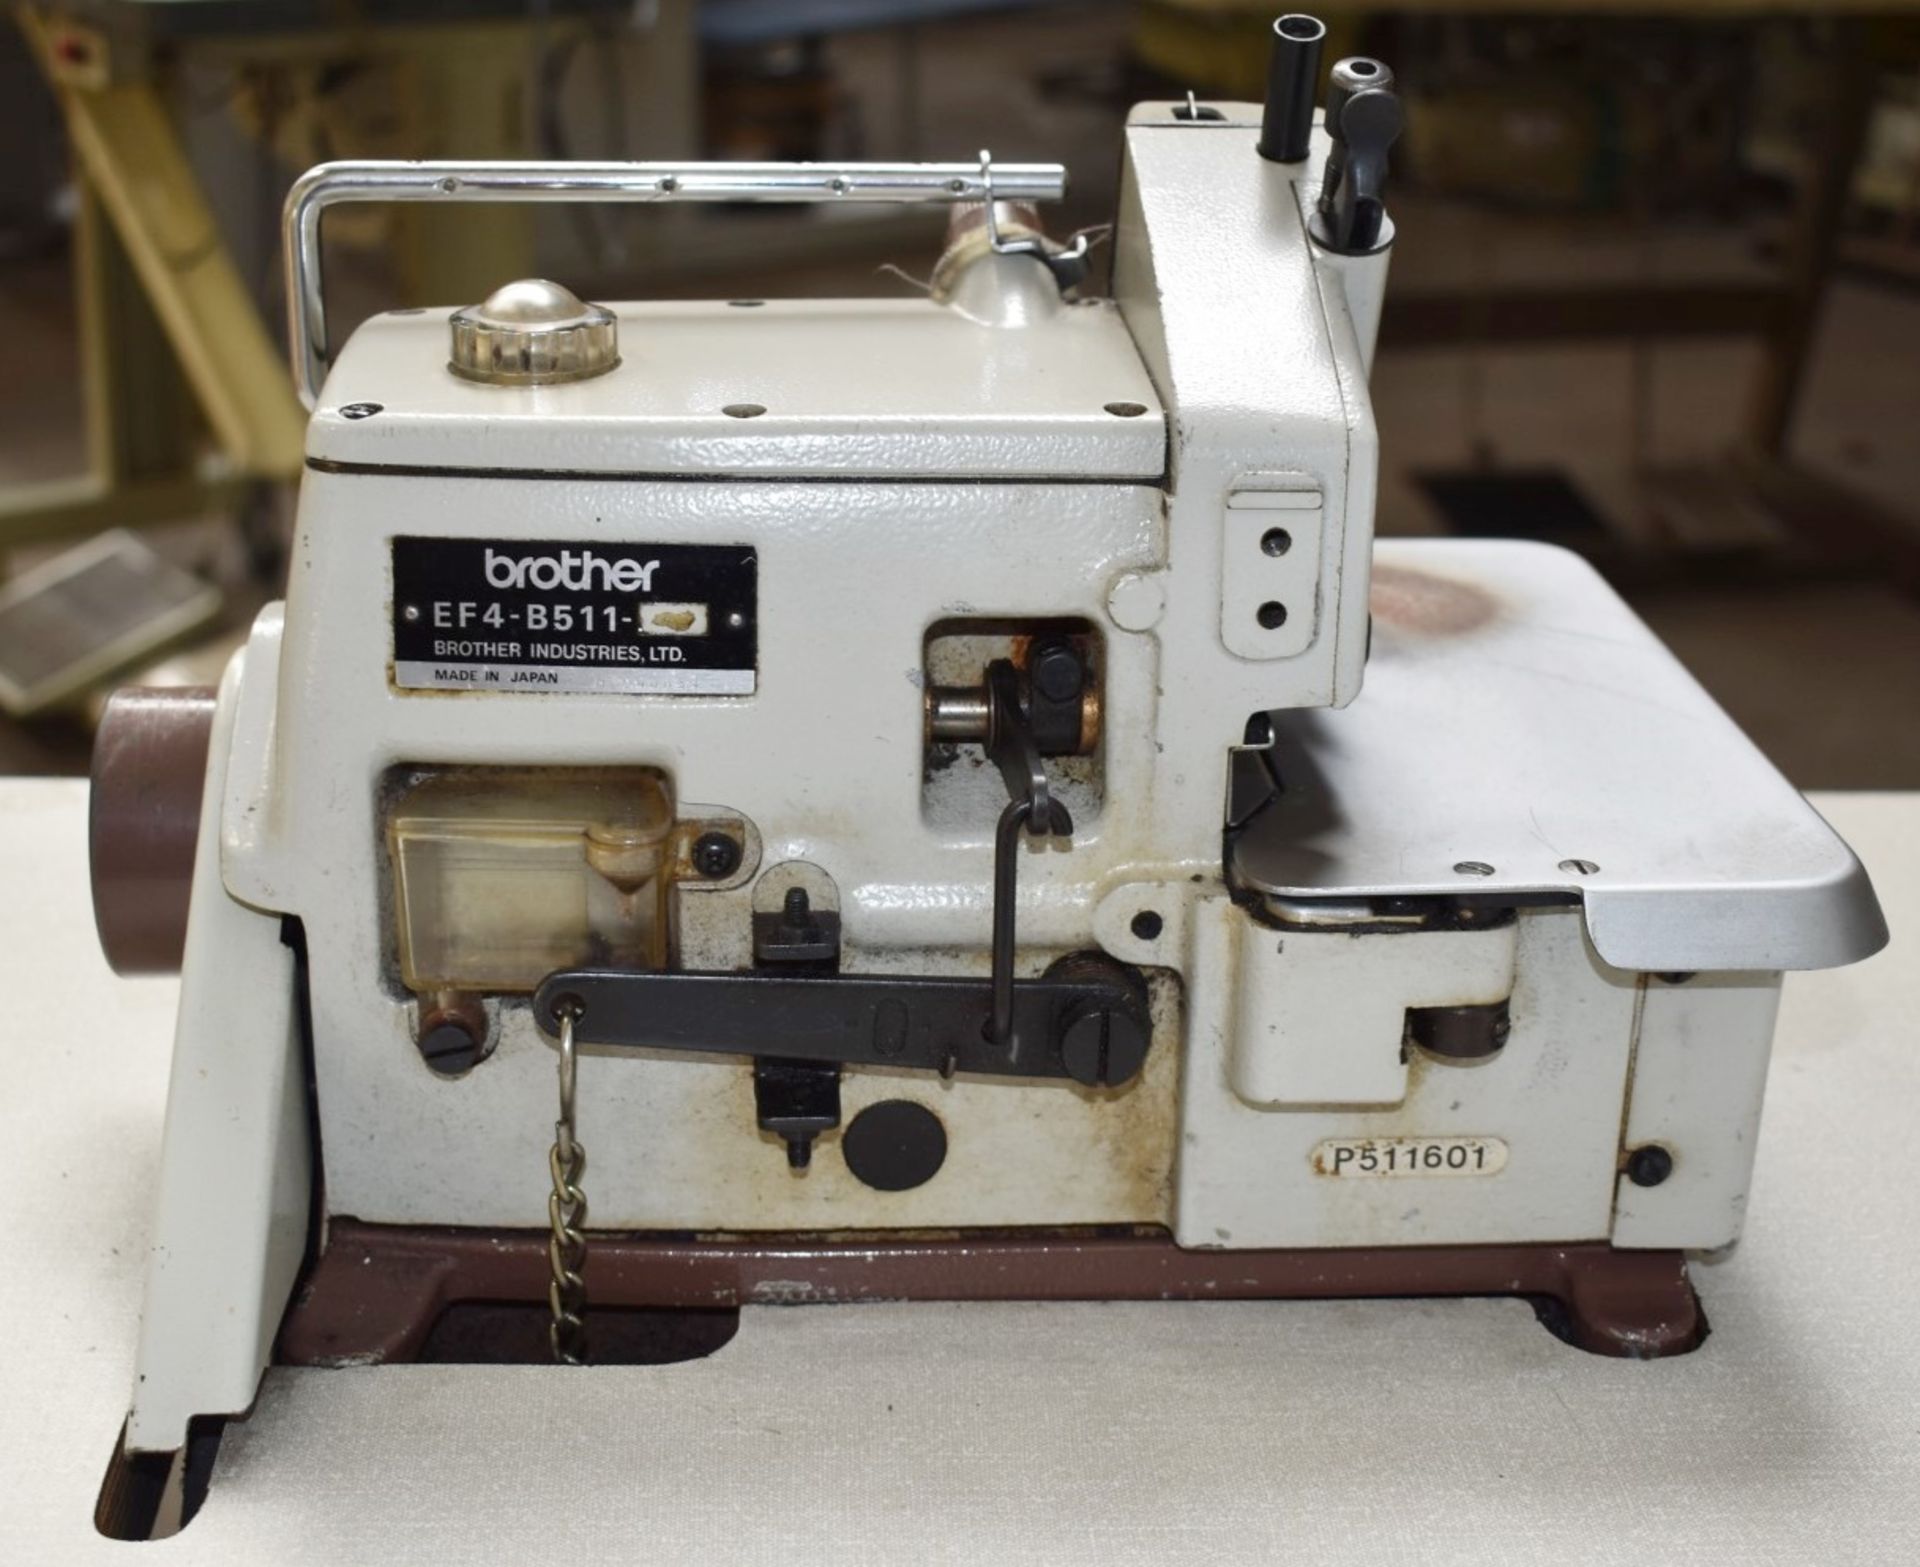 1 x Brother 3 Thread Overlock Industrial Sewing Machine - Model EF4-B511 - Image 19 of 27